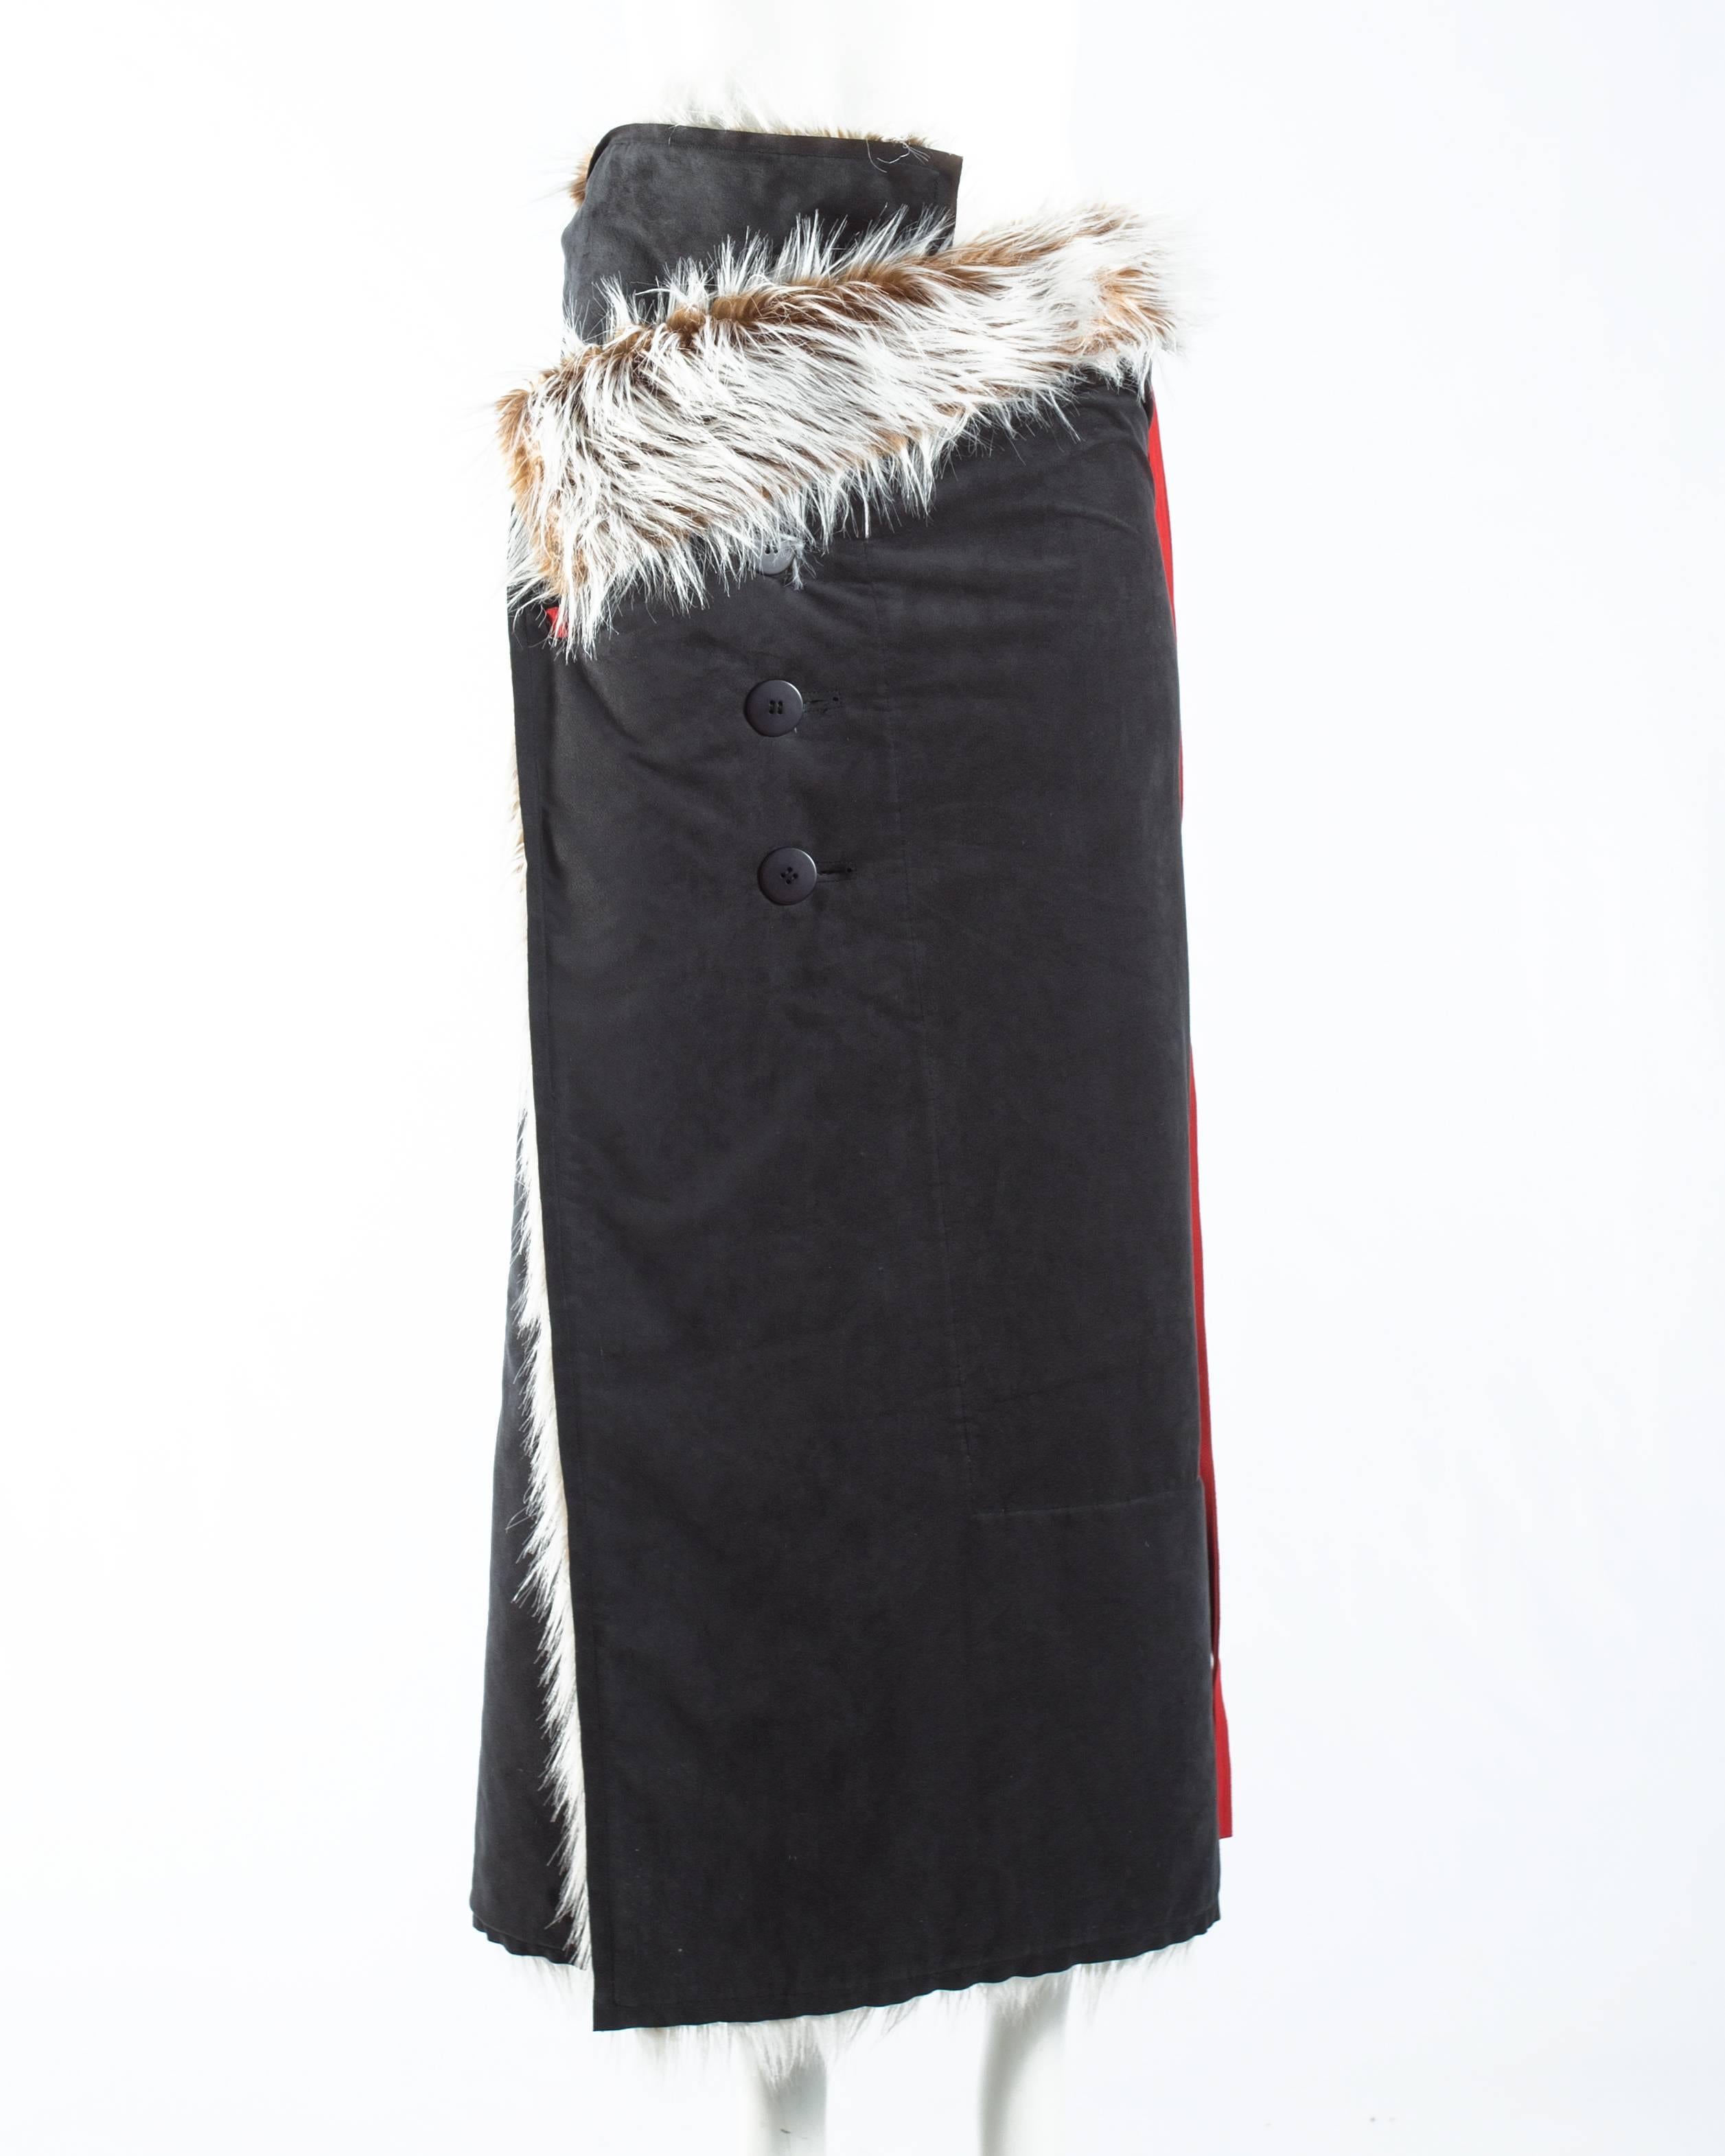 Issey Miyake faux fur vest and skirt ensemble, A/W 2000 In Excellent Condition For Sale In London, GB